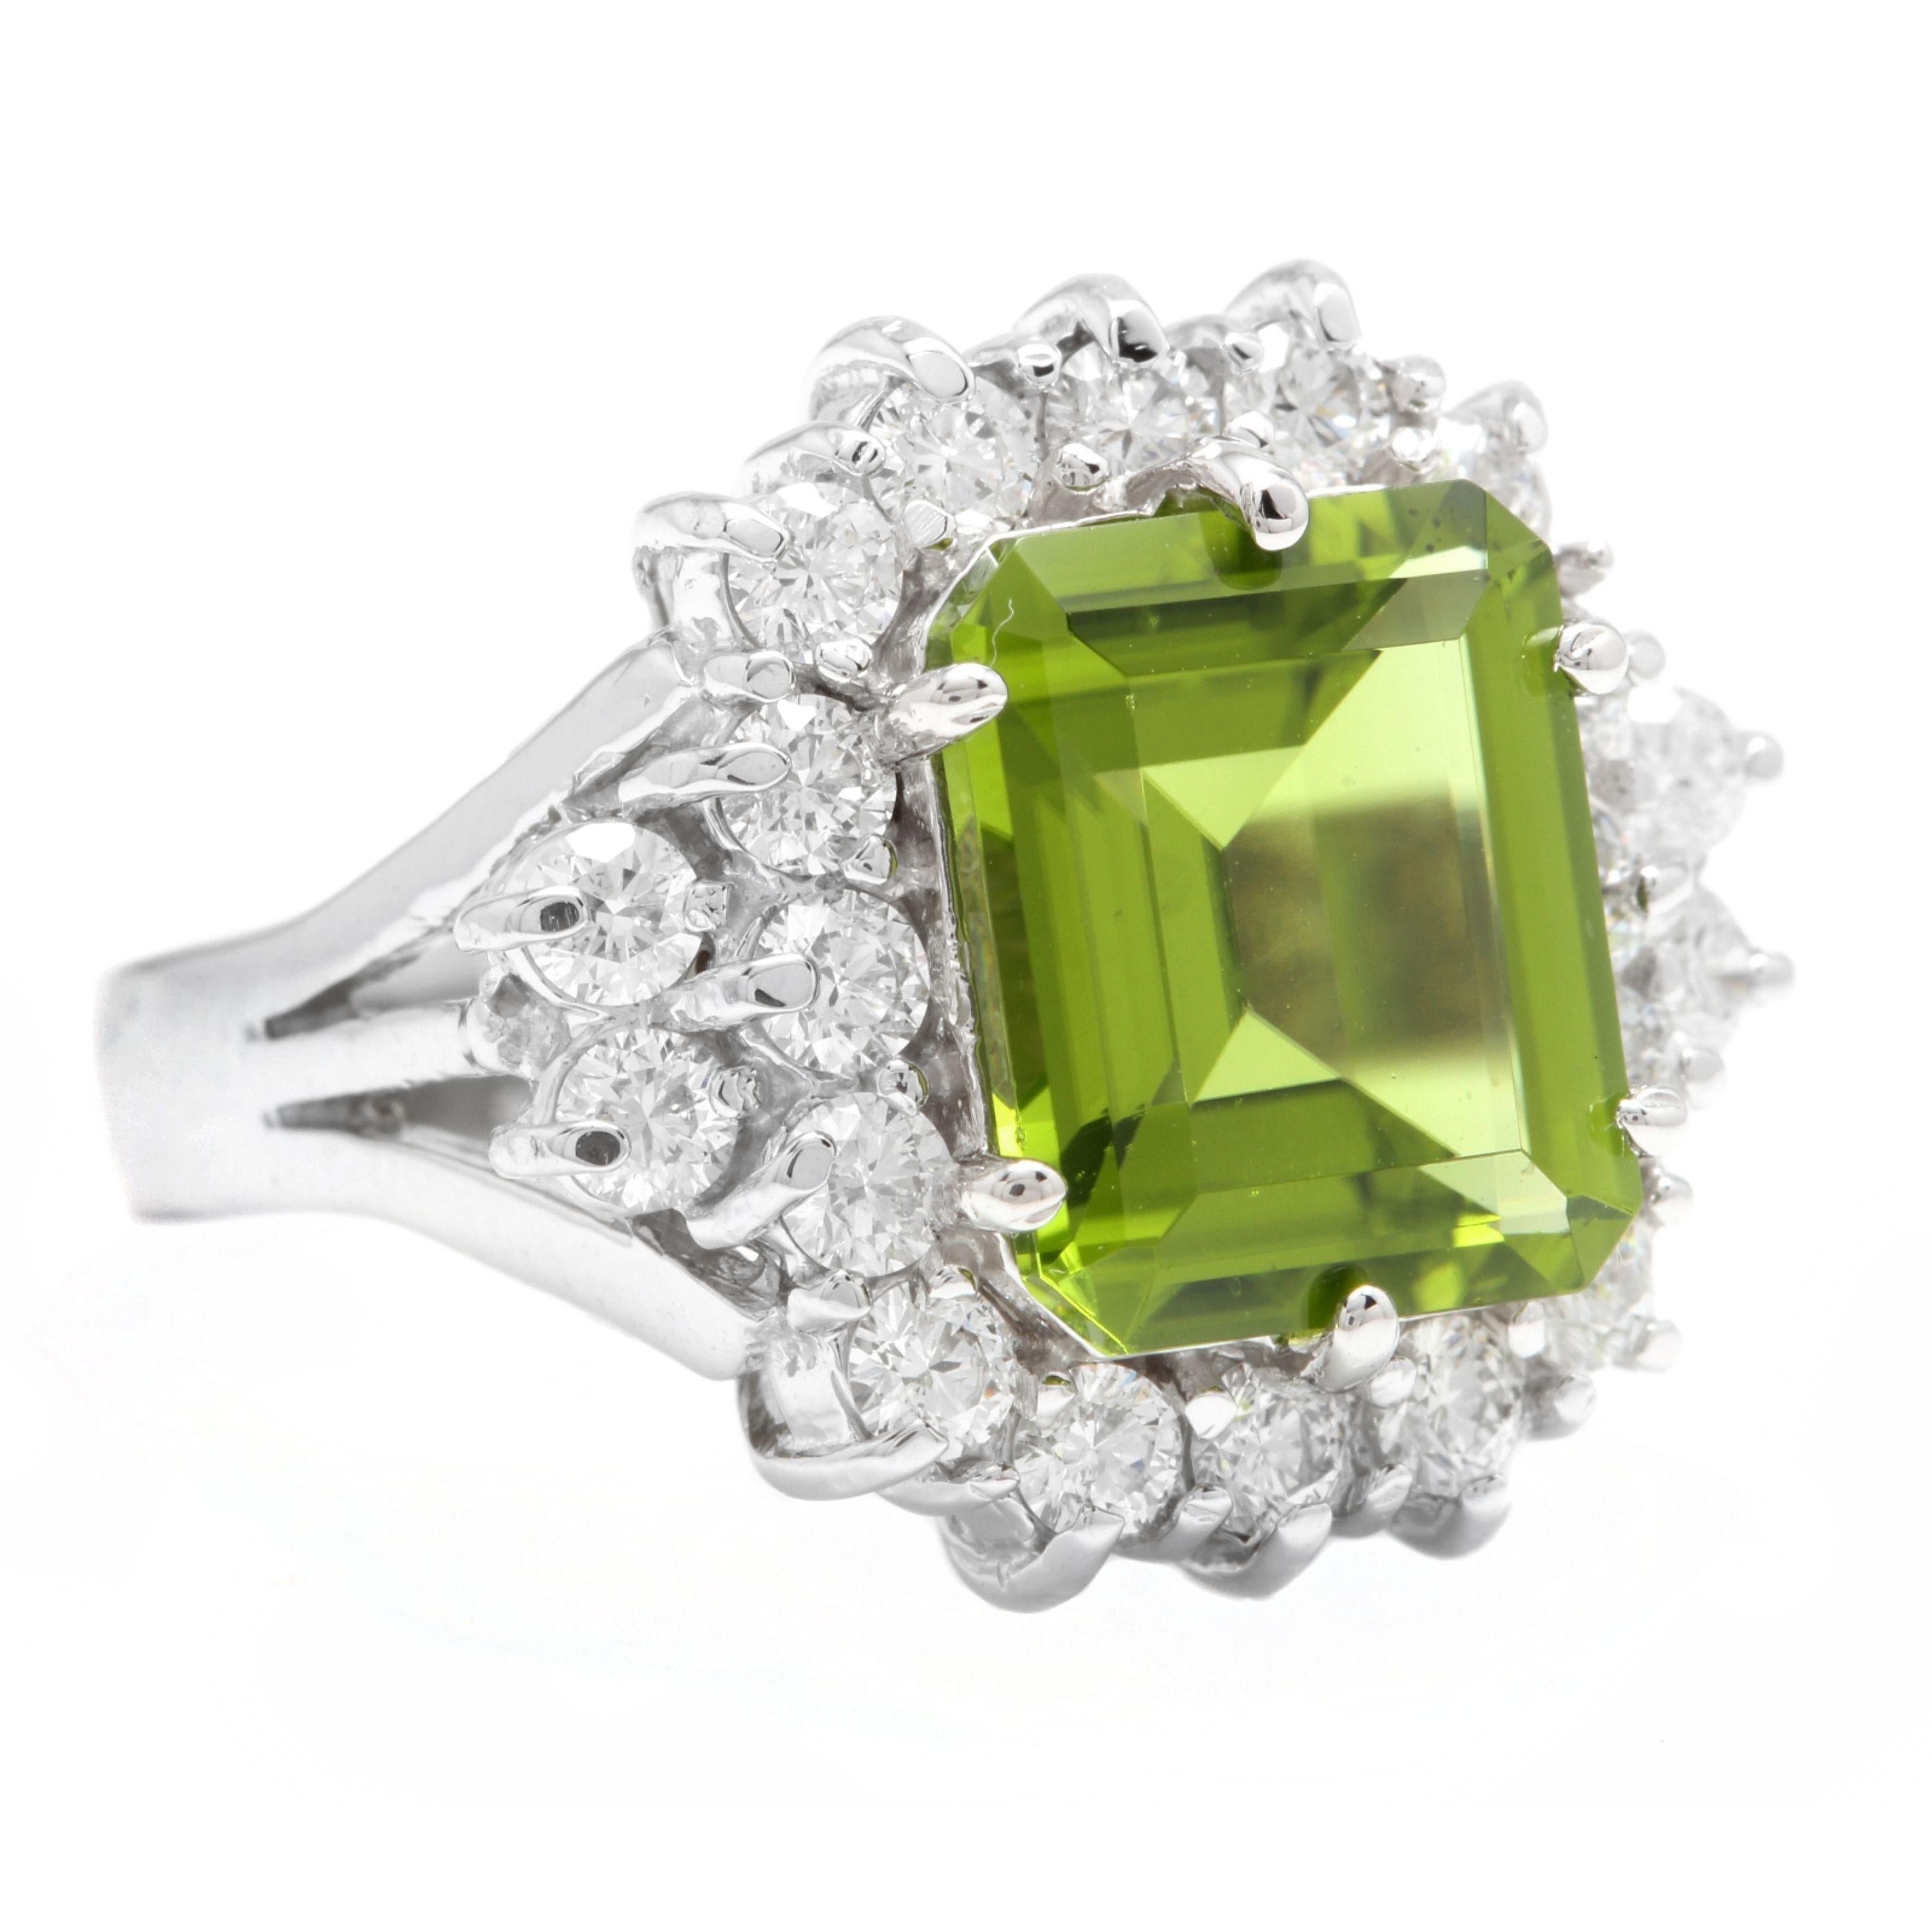 6.20 Carats Natural Very Nice Looking Peridot and Diamond 14K Solid White Gold Ring

Stamped: 14K

Total Natural Emerald Cut Peridot Weight is: Approx. 5.00 Carats

Peridot Measures: Approx. 11 x 9mm

Natural Round Diamonds Weight: Approx. 1.20